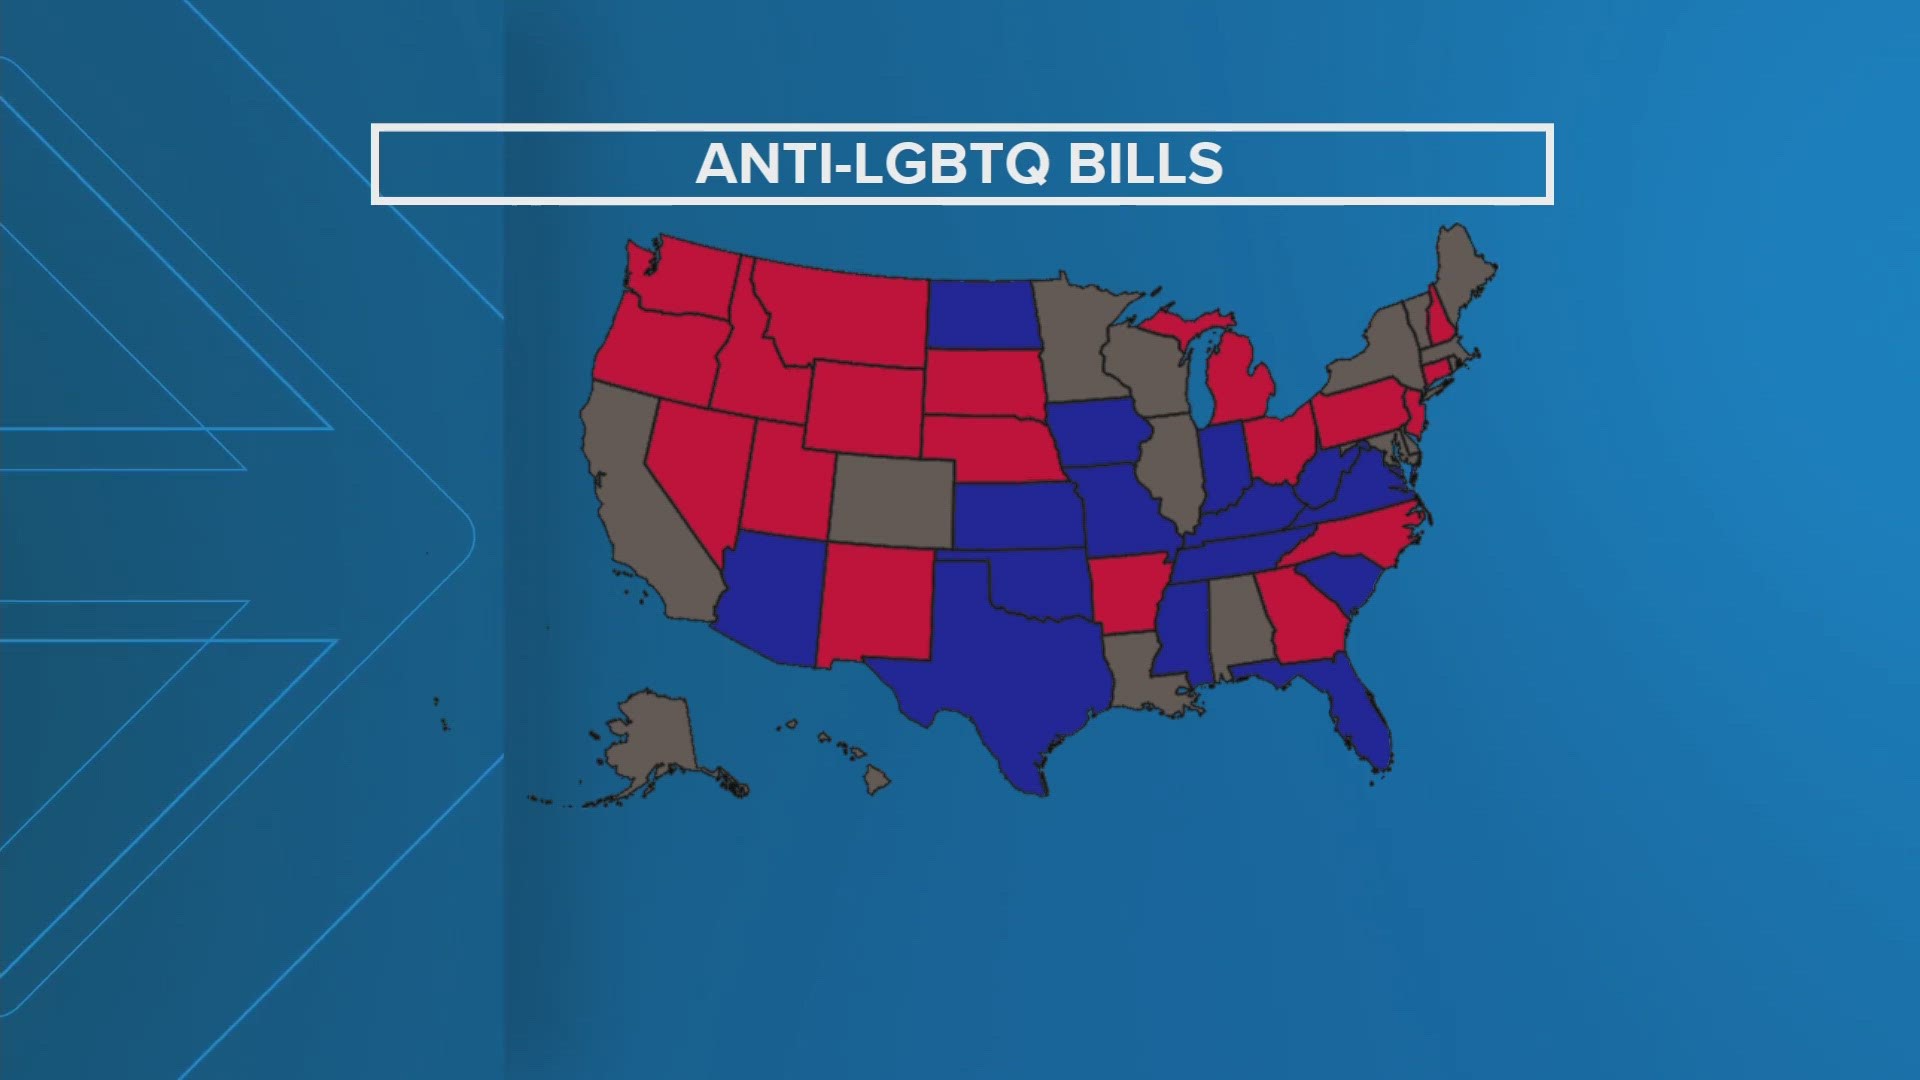 Red states filed less than 10 bills, while blue states filed more than 10.